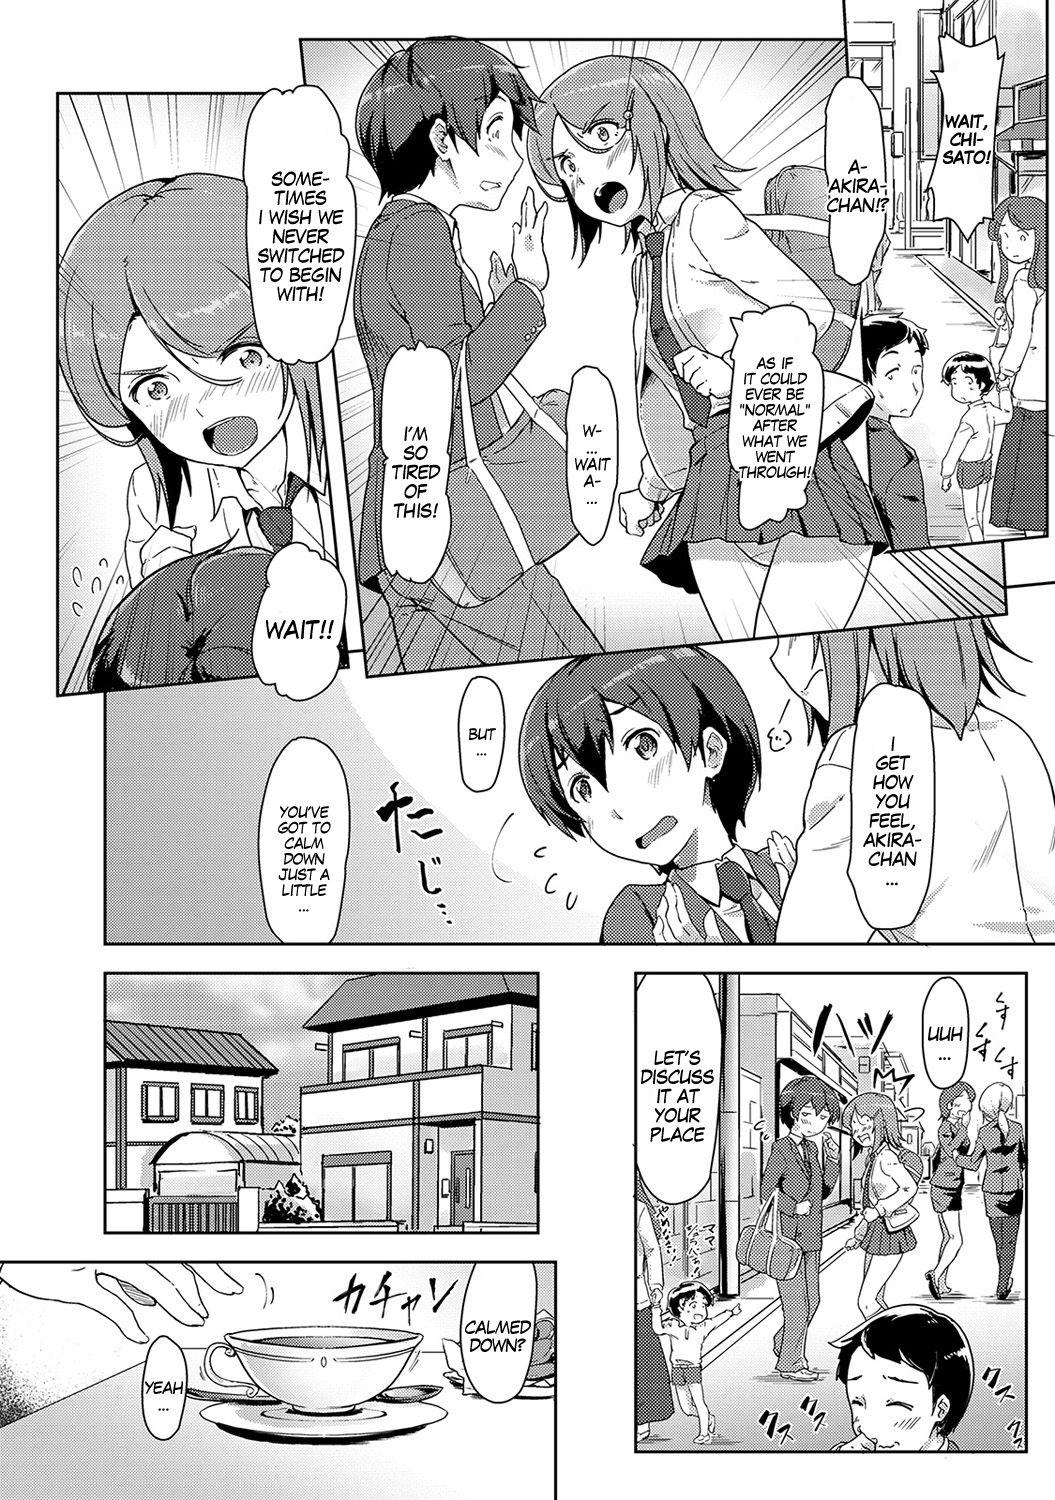 Wives Ecchi Shitara Irekawacchatta!? | We Switched Our Bodies After Having Sex!? Ch. 5 Good - Page 1